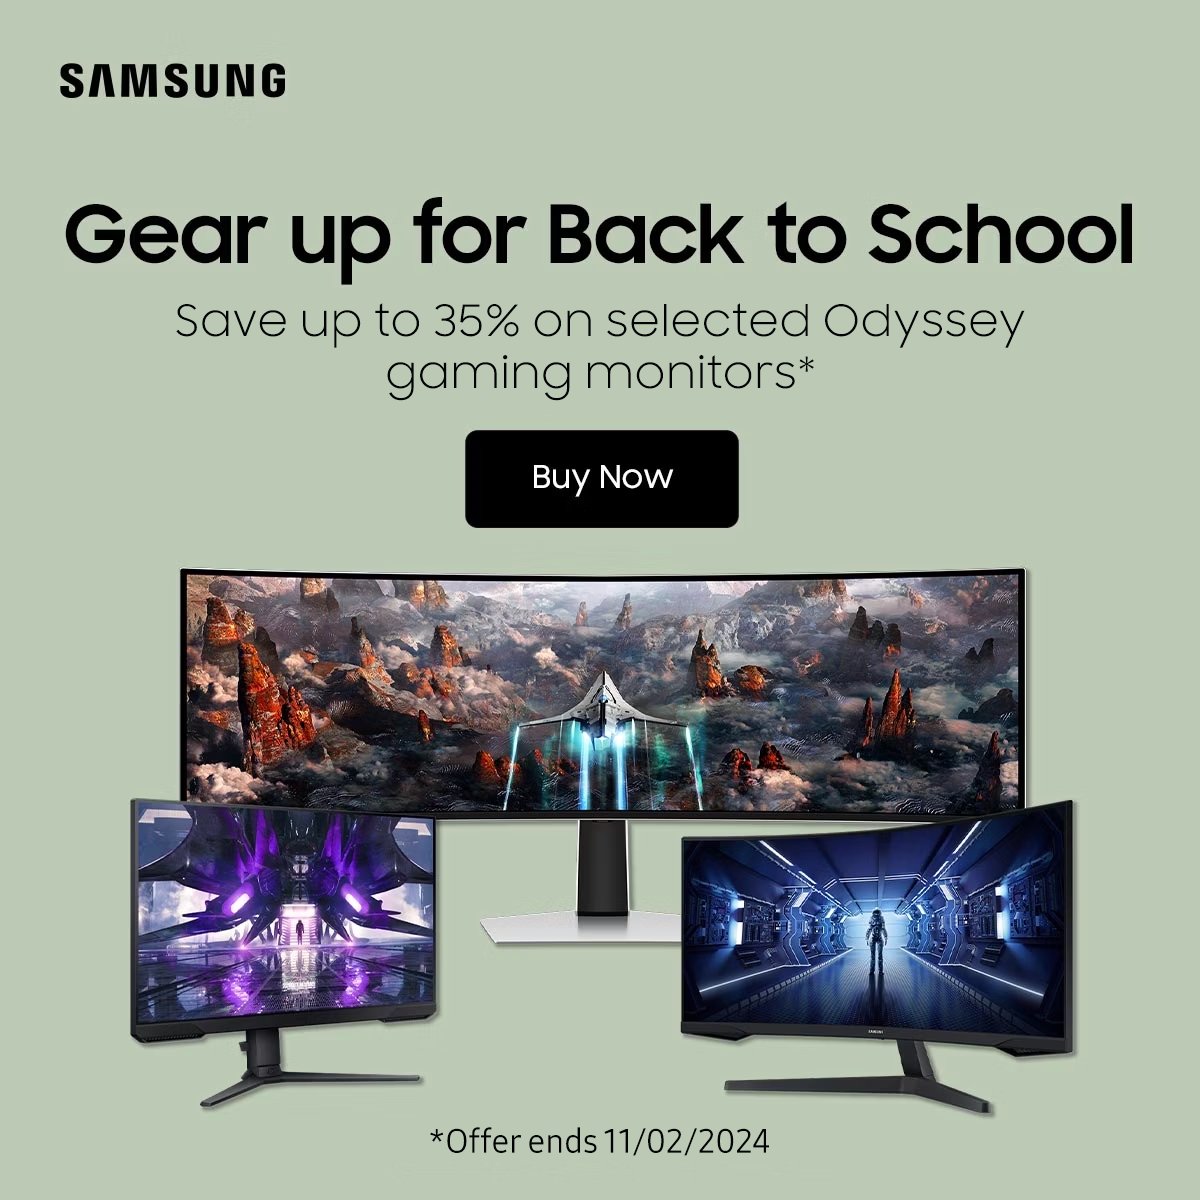 Save 35% on this Samsung gaming monitor right now